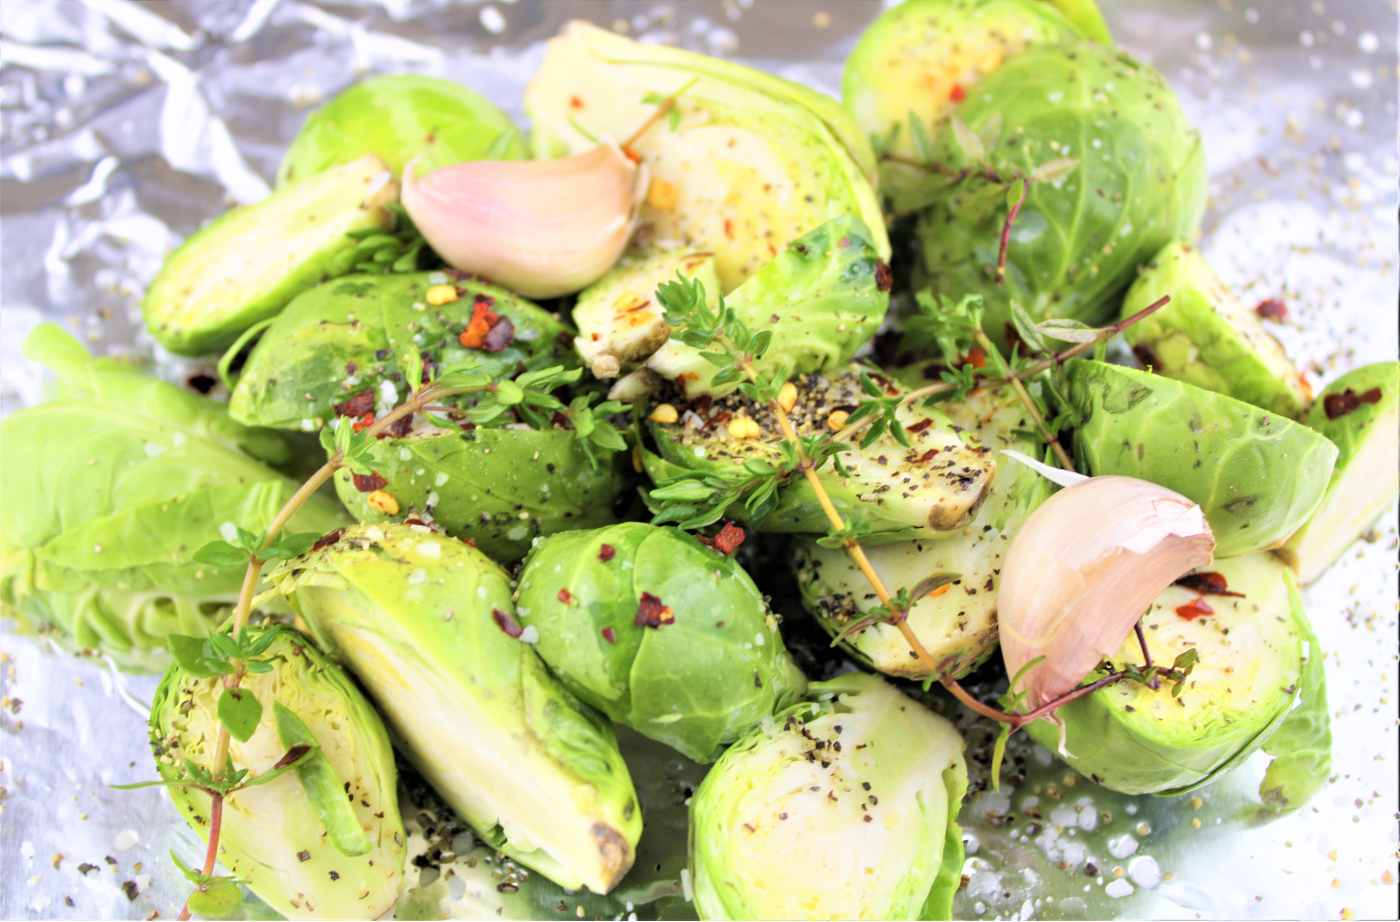 brussels sprouts and spices - roasted brussels sprouts recipe